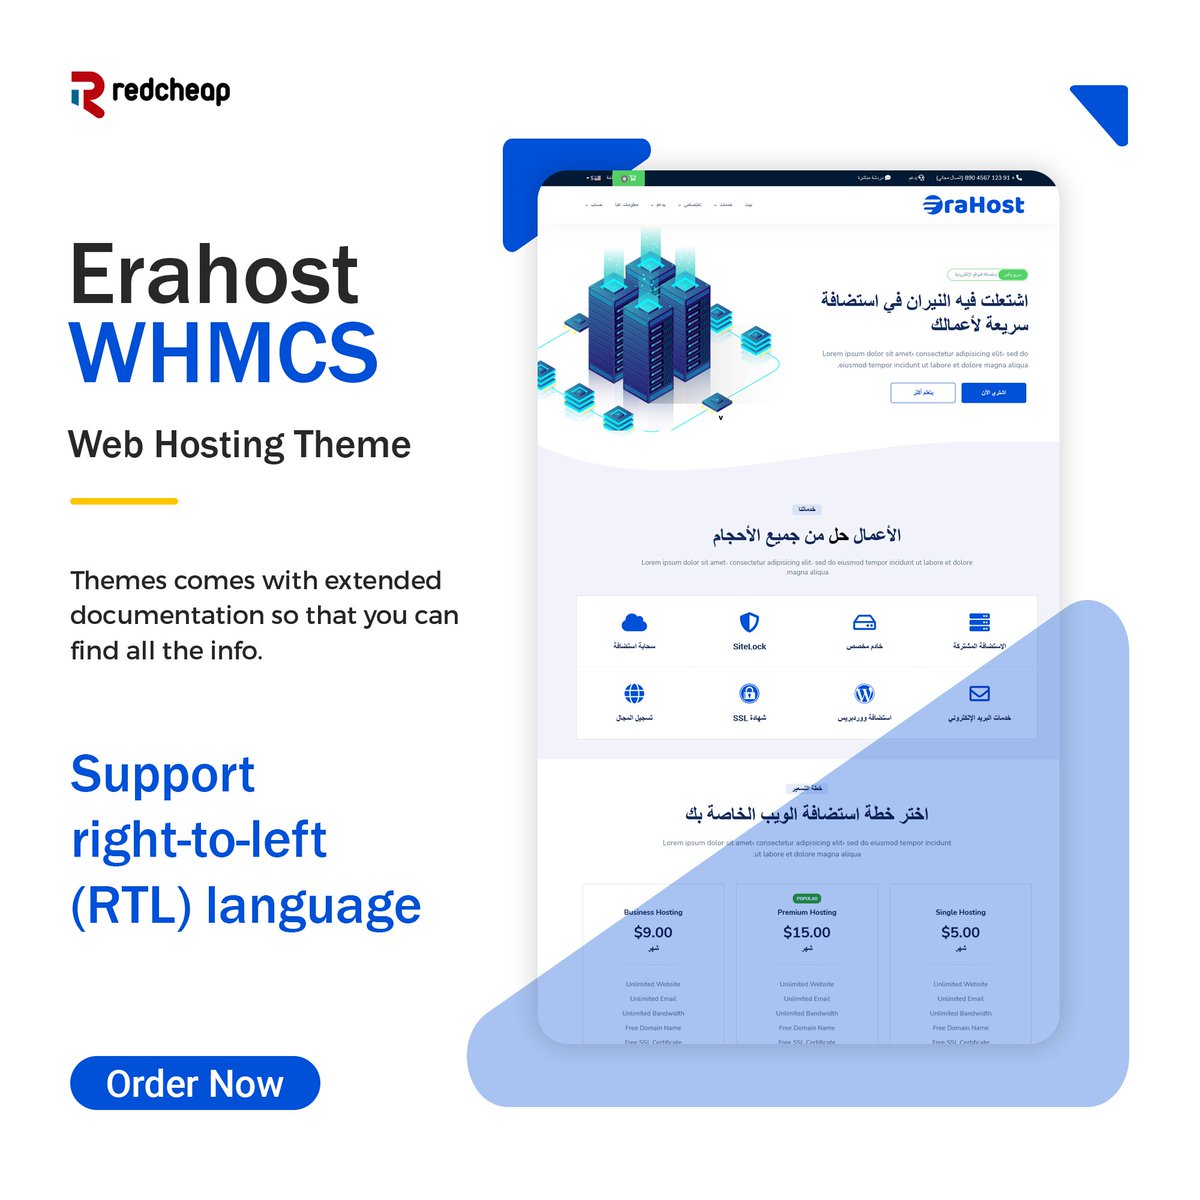 🌟 Experience the Erahost WHMCS Theme with RTL support! 🚀 Now offering a seamless experience for Right-to-Left languages. 🔥 Elevate your web hosting business with a professional and sleek design tailored to your needs.  #Erahost #WHMCS #RTL #WebHosting

rctheme.com/erahost-whmcs-…